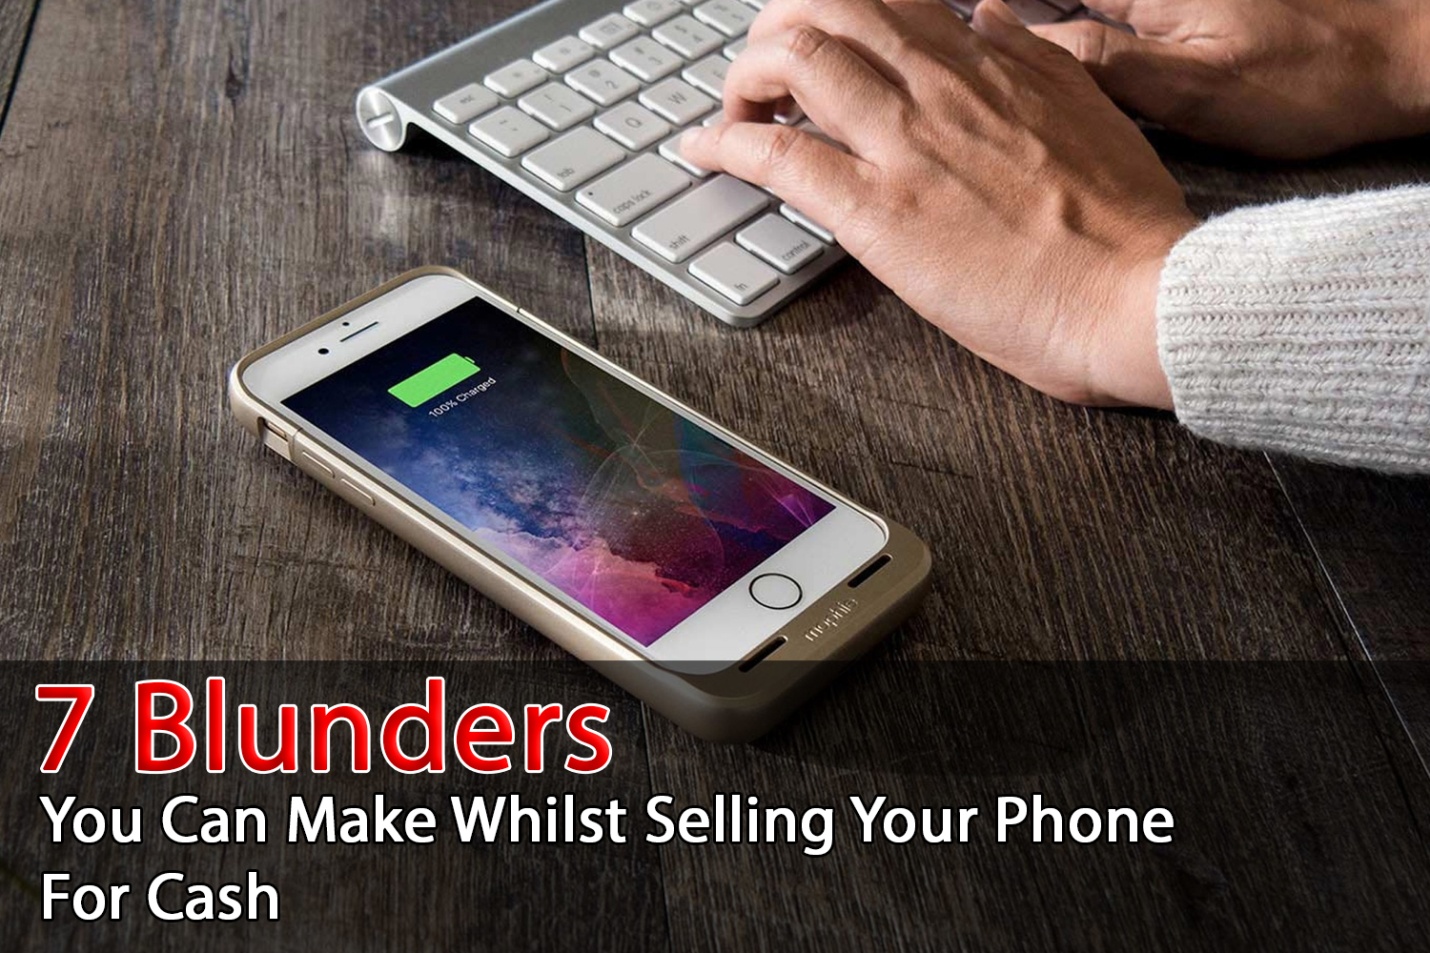 7 Blunders You Can Make Whilst Selling Your Phone For Cash